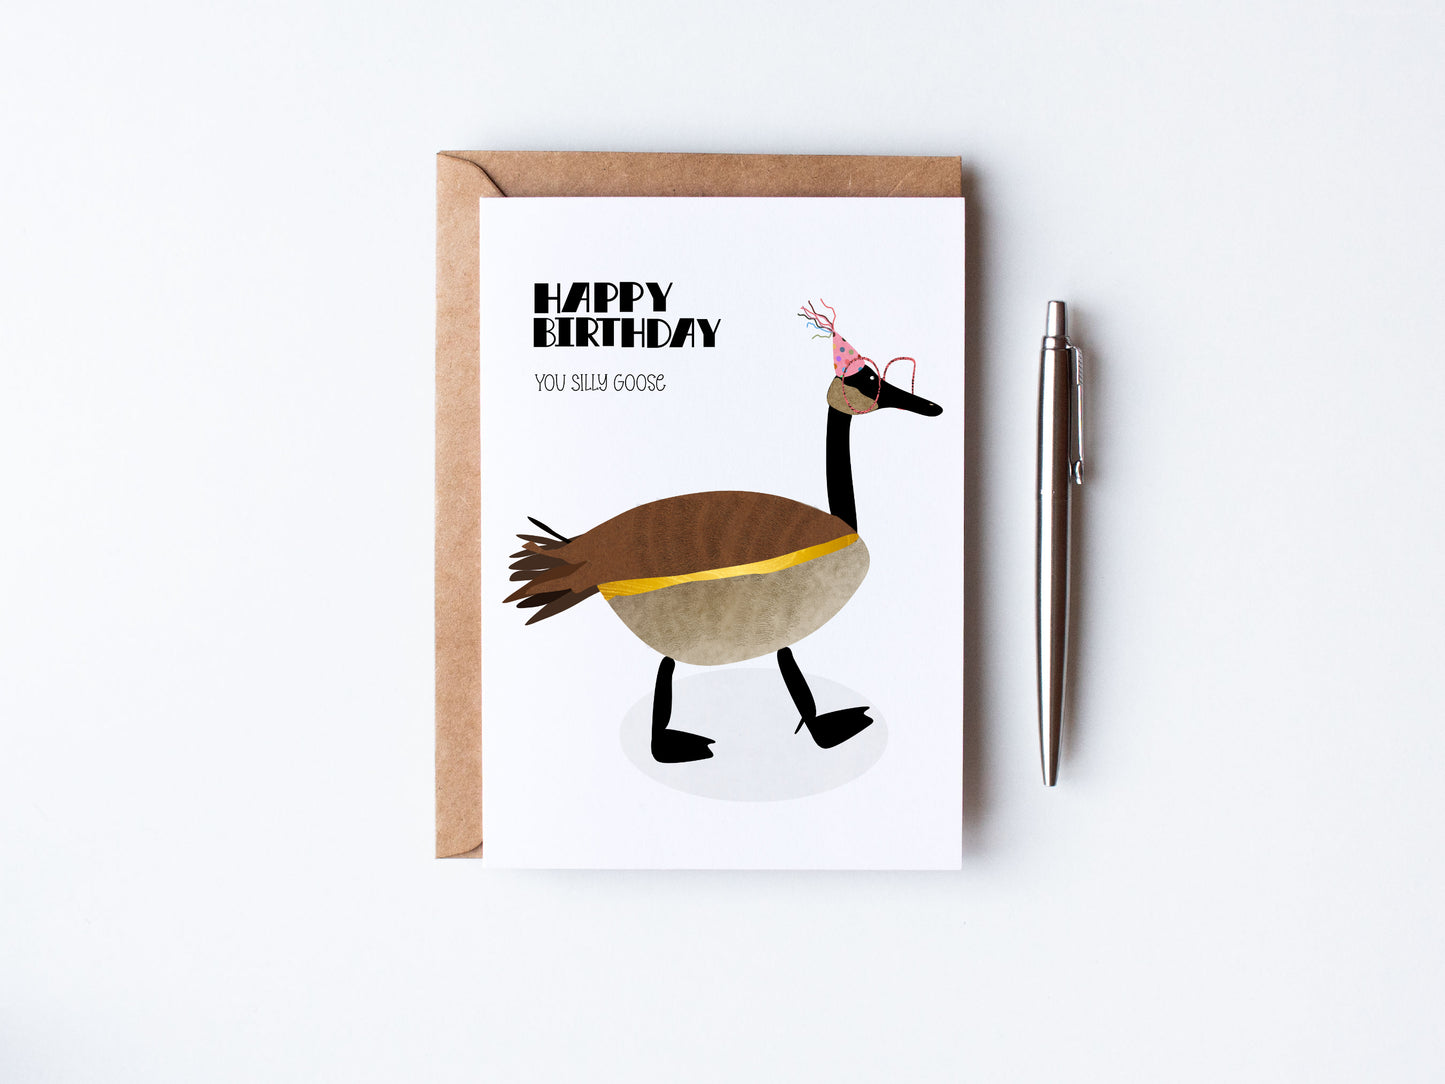 Hand Illustrated canada goose with a party hat and big goofy glasses on